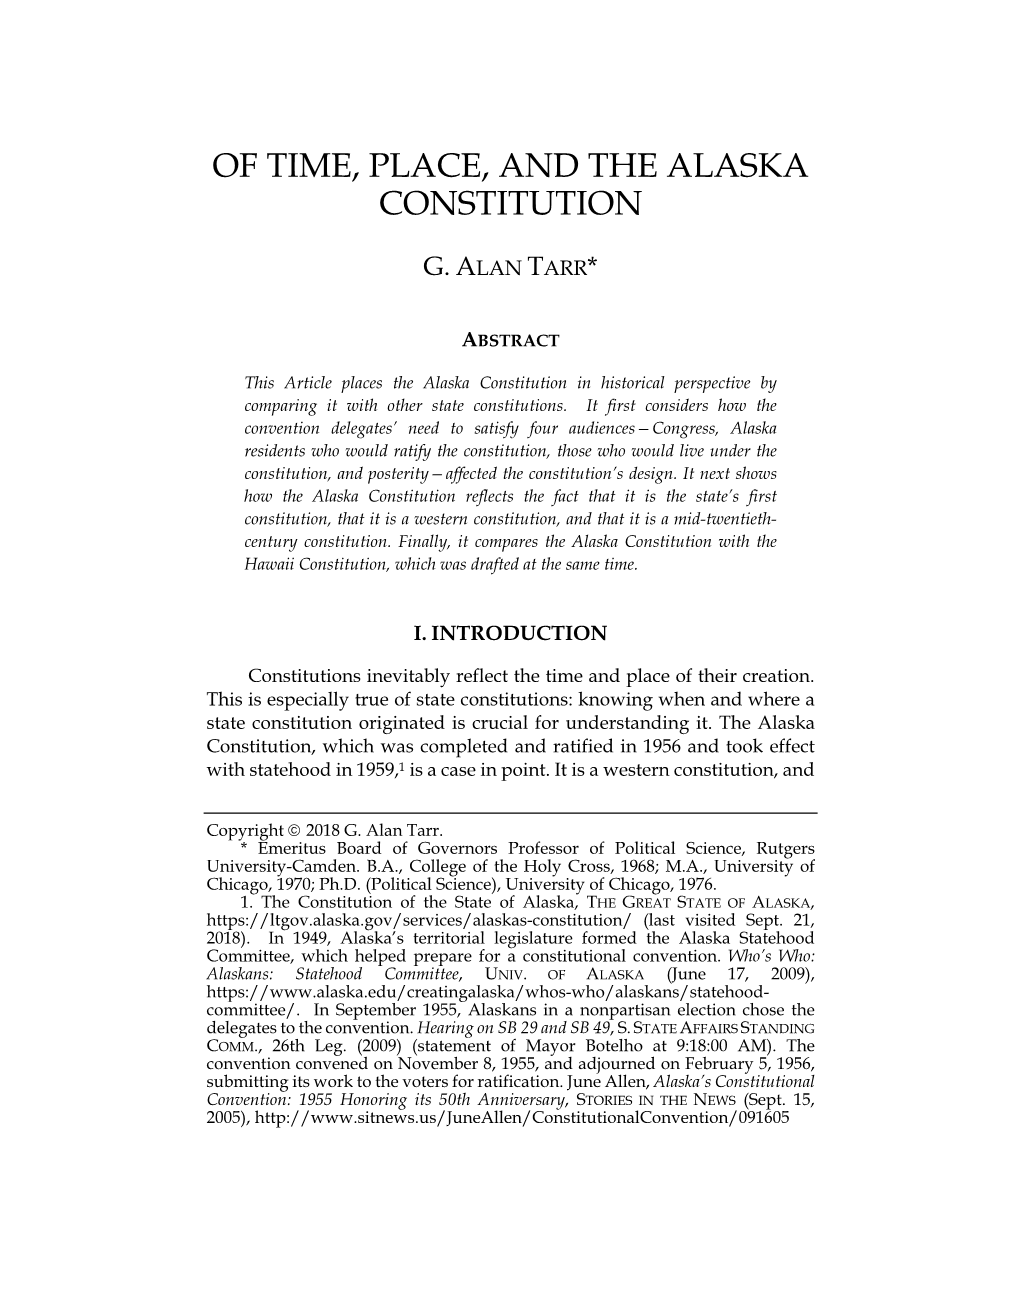 Of Time, Place, and the Alaska Constitution